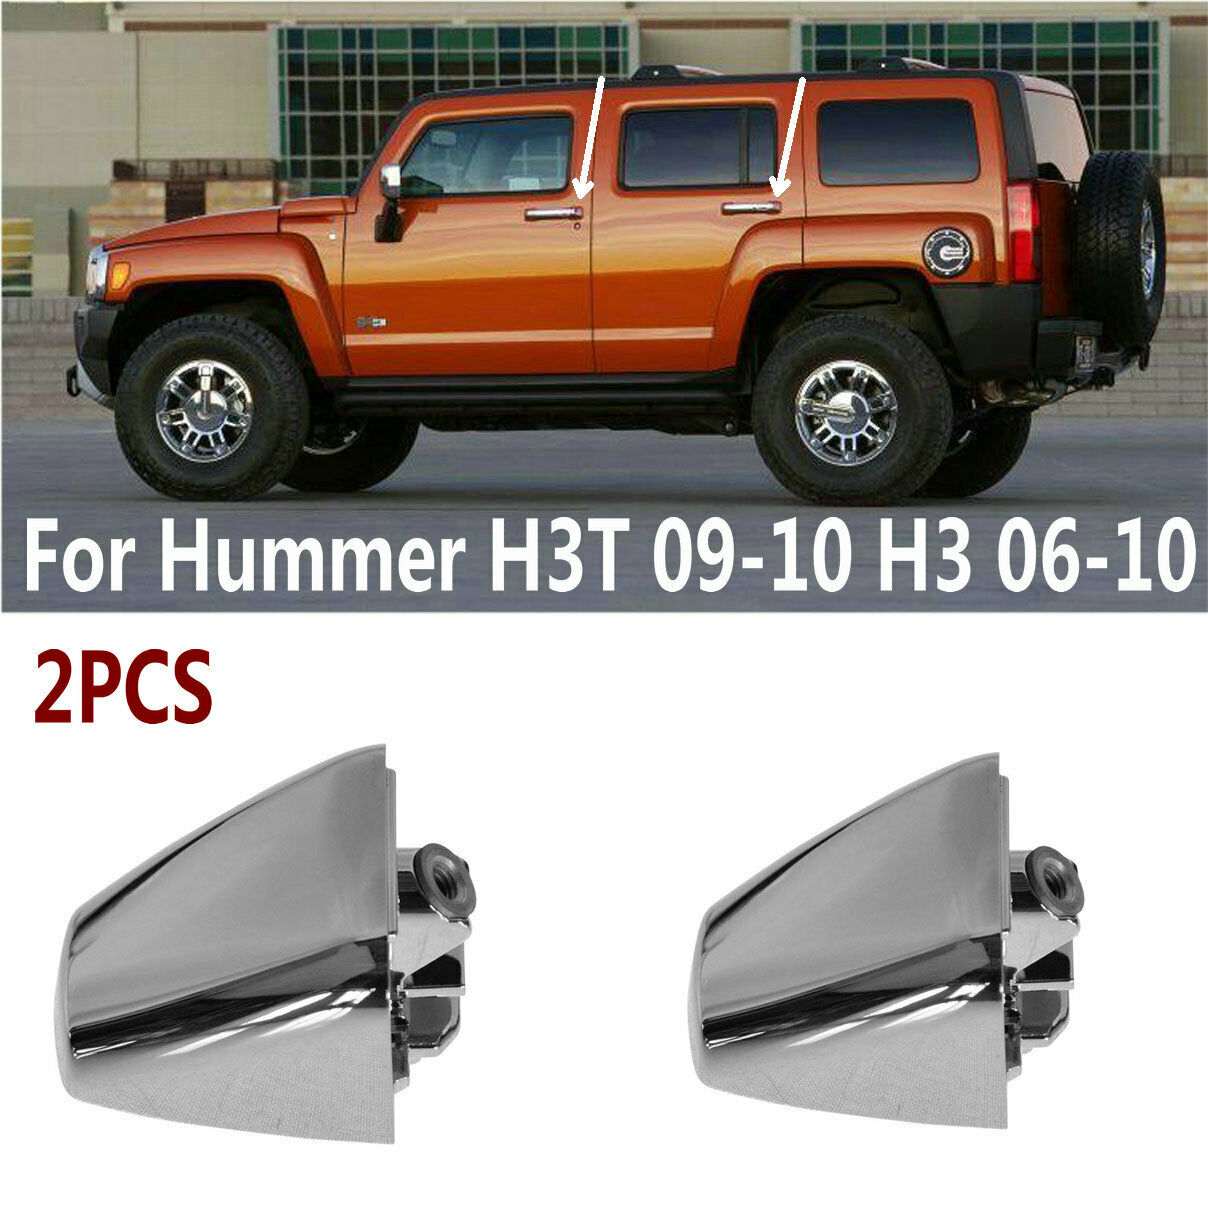 Front/Rear Outside Door Handle Cover Caps Chrome For Hummer H3T 2009-10 H3  06-10 | eBay